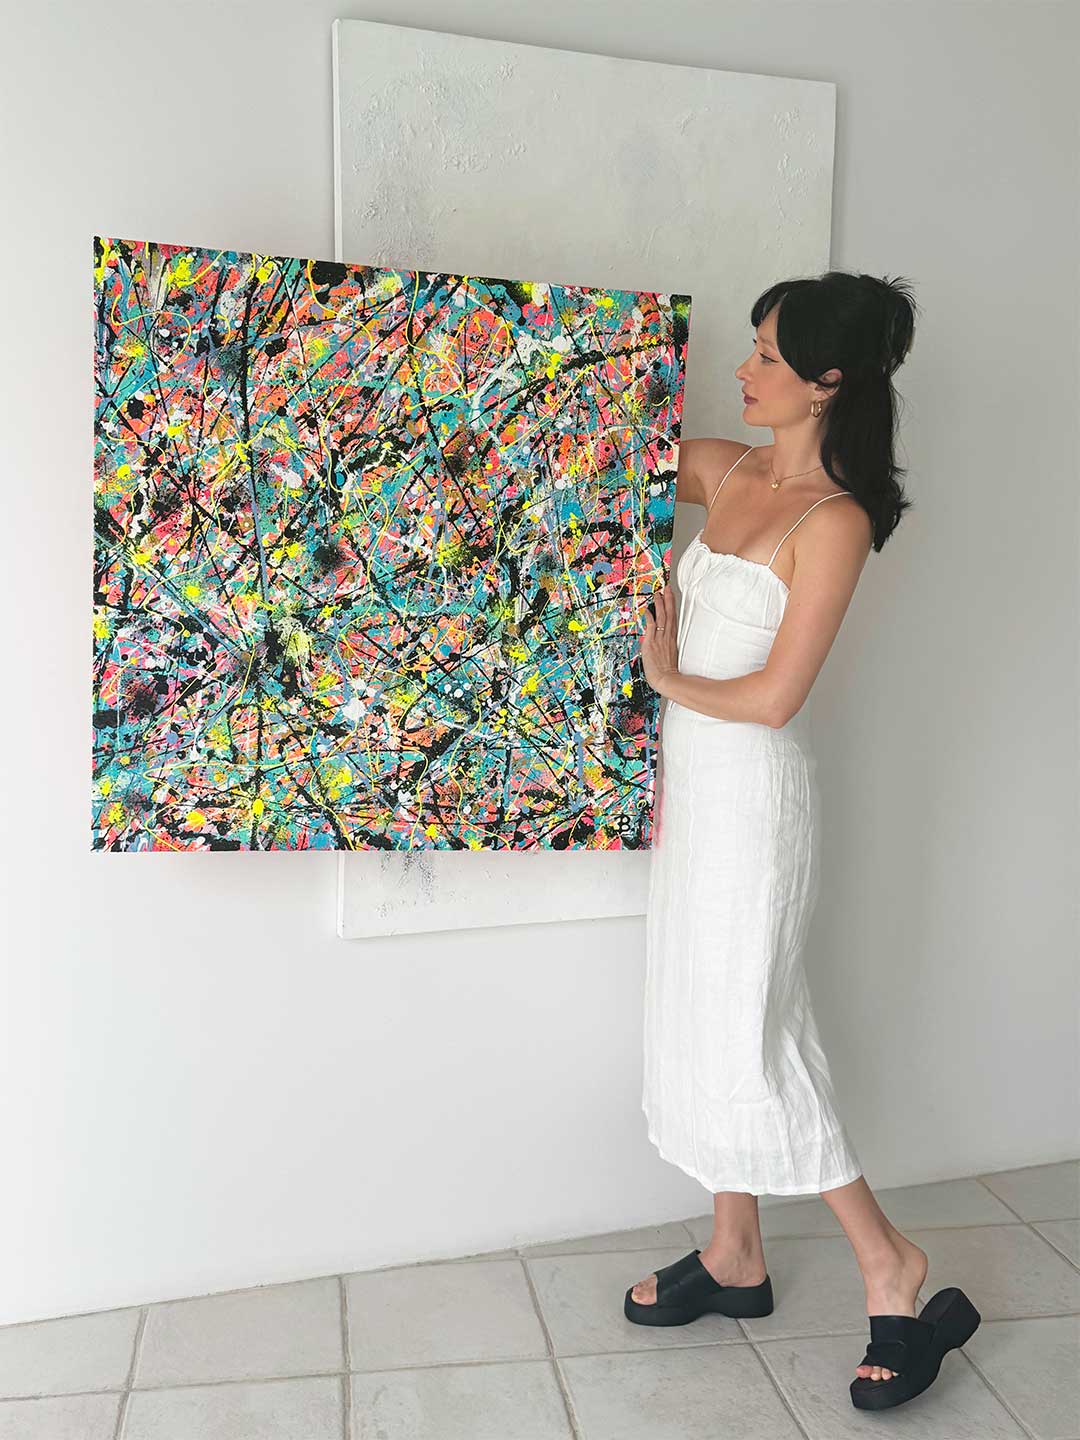 Image of Bridget Bradley, Contemporary Abstract Artist Wearing White Dress, Holds her Original Canvas Painting, 'Labyrinth'